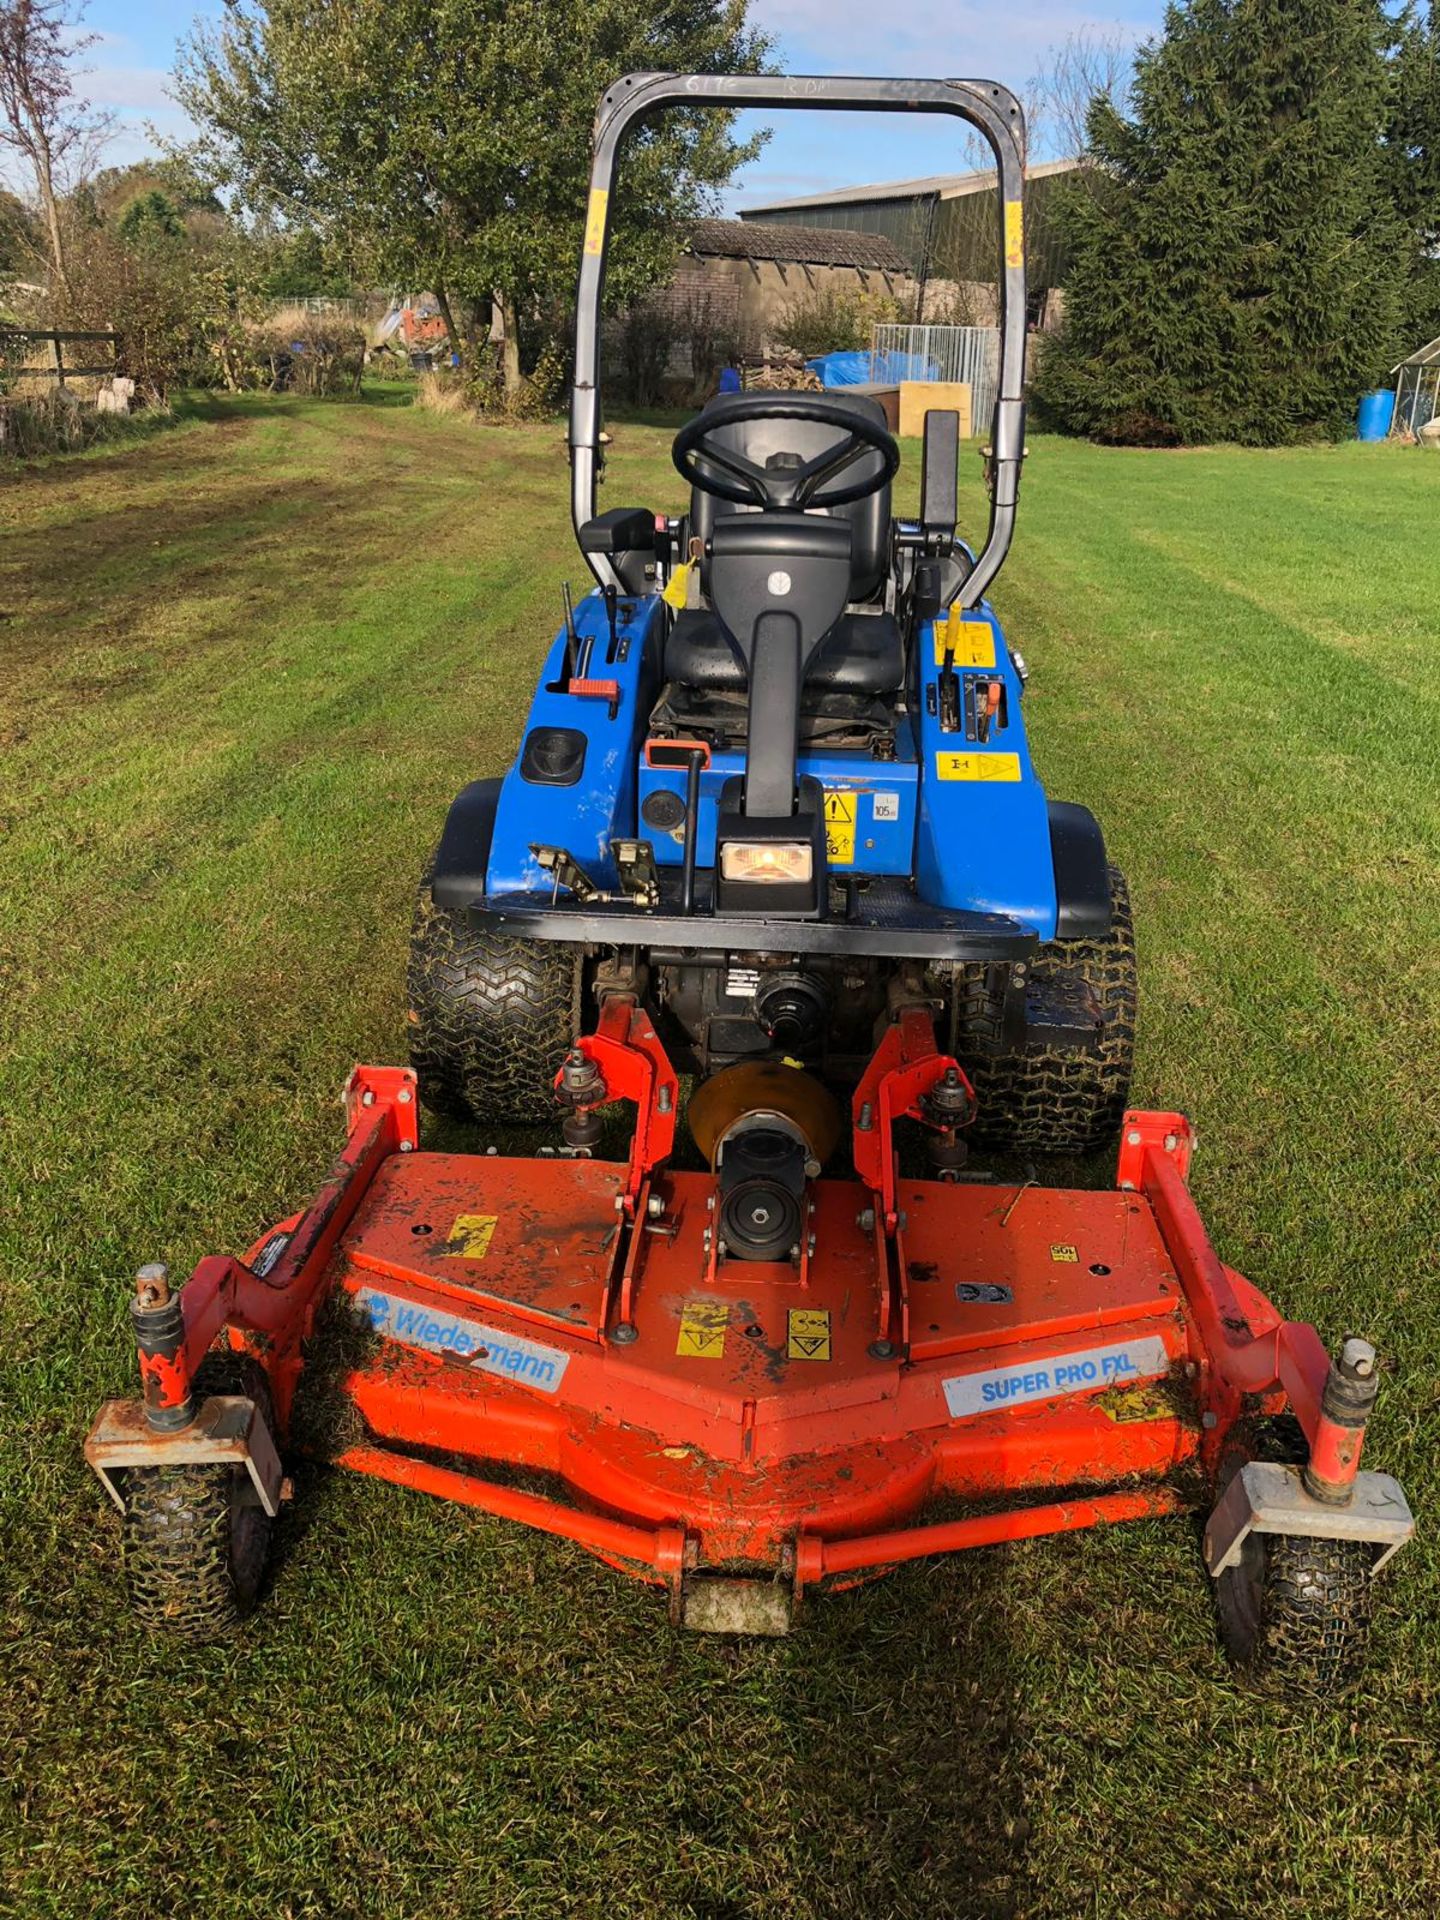 2010/60 REG NEW HOLLAND MC35 4WD RIDE ON LAWN MOWER LOW HOURS *PLUS VAT* - Image 4 of 21